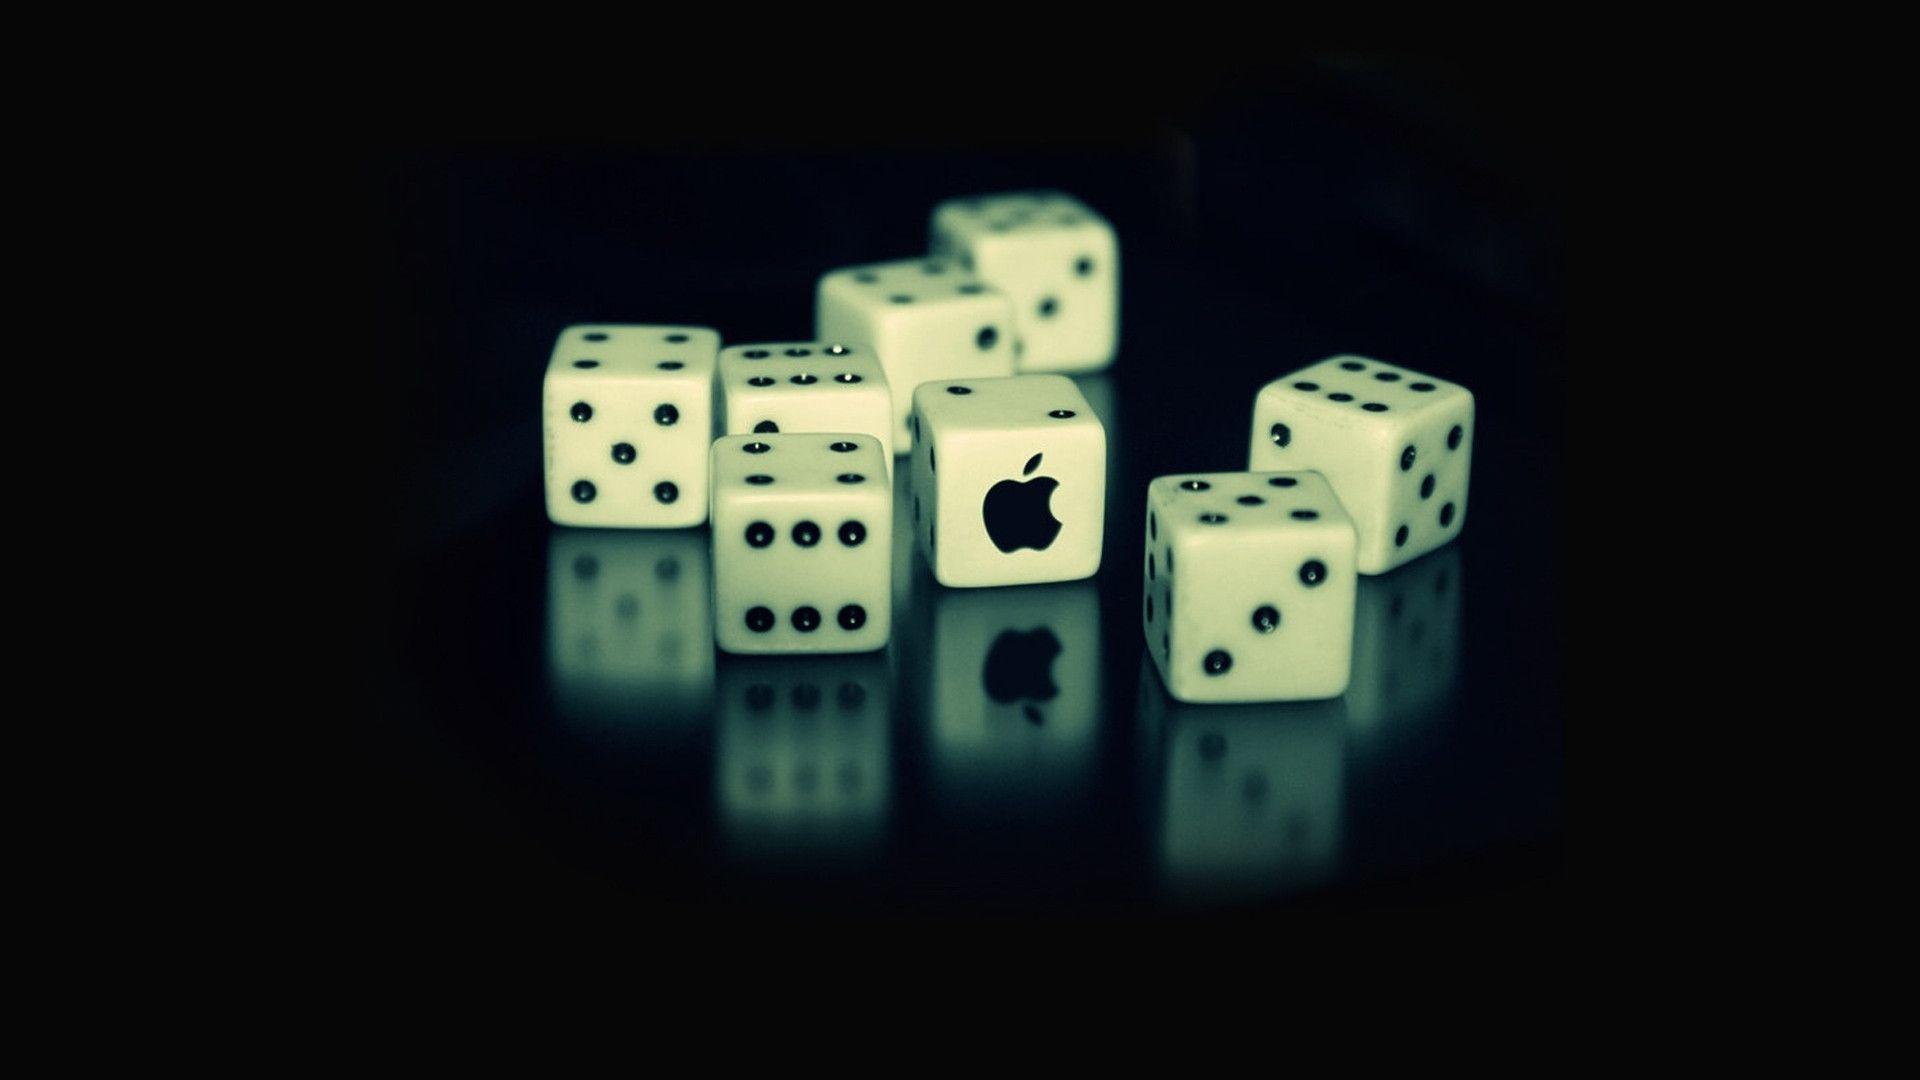 1080p HD Wallpaper Dices And Apple Dices Image. High Quality PC